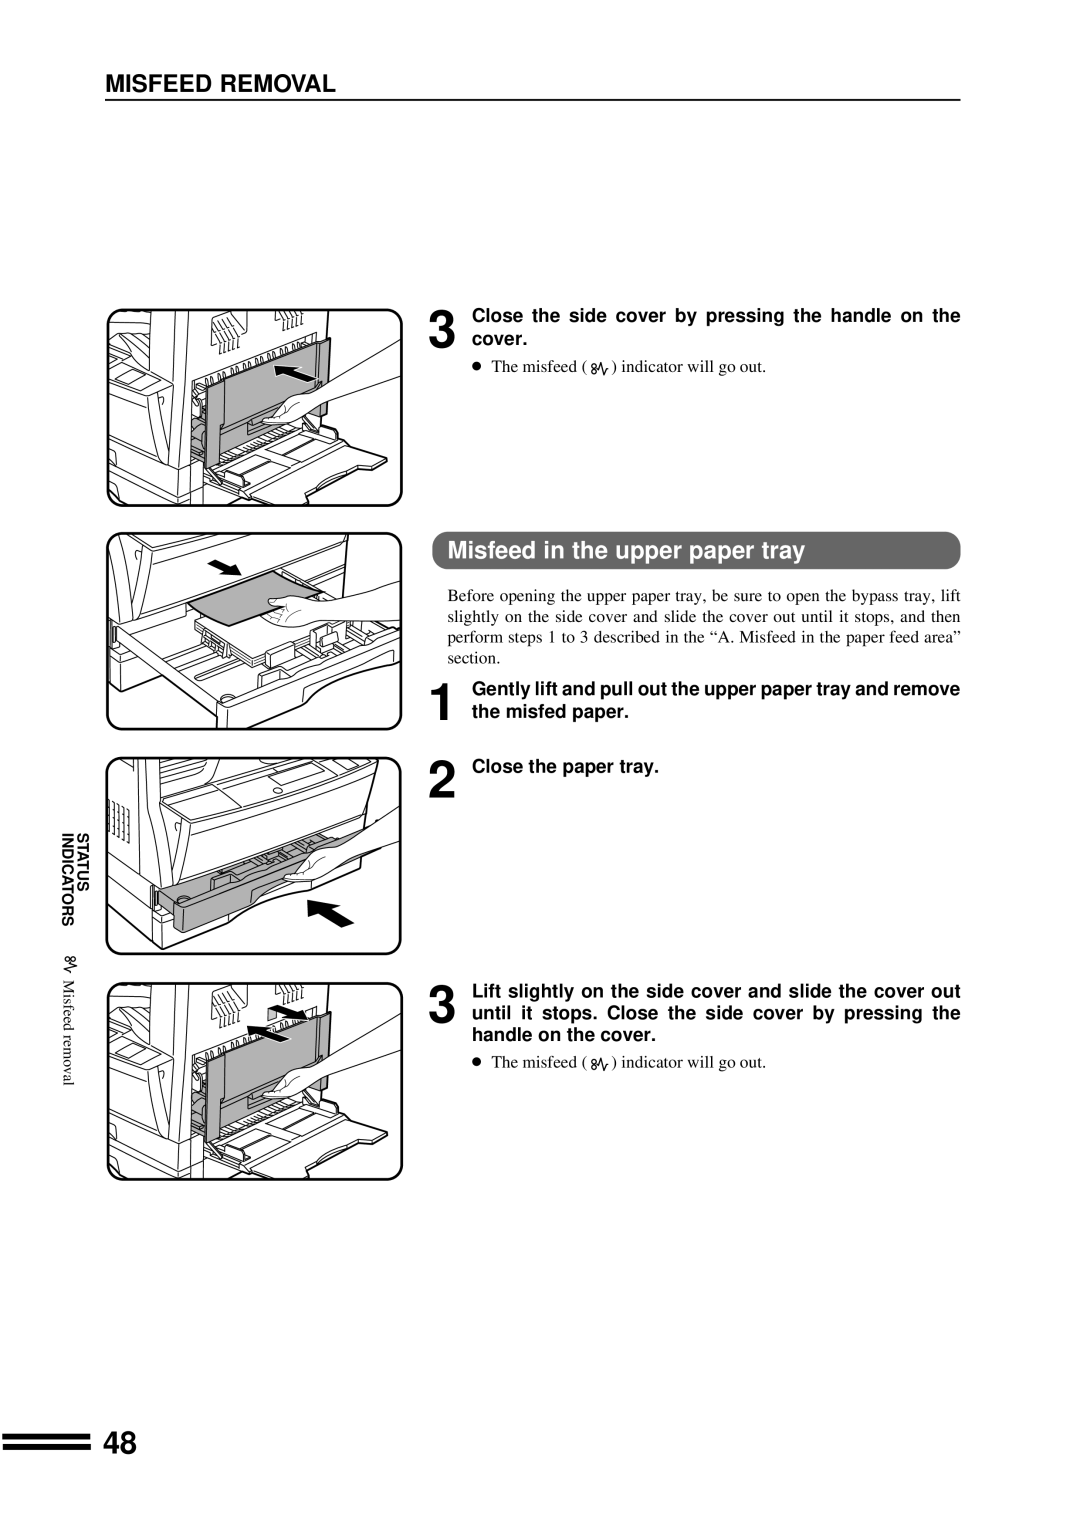 Sharp AR-207 Misfeed in the upper paper tray, Close the side cover by pressing the handle on the 3 cover, Misfeed Removal 